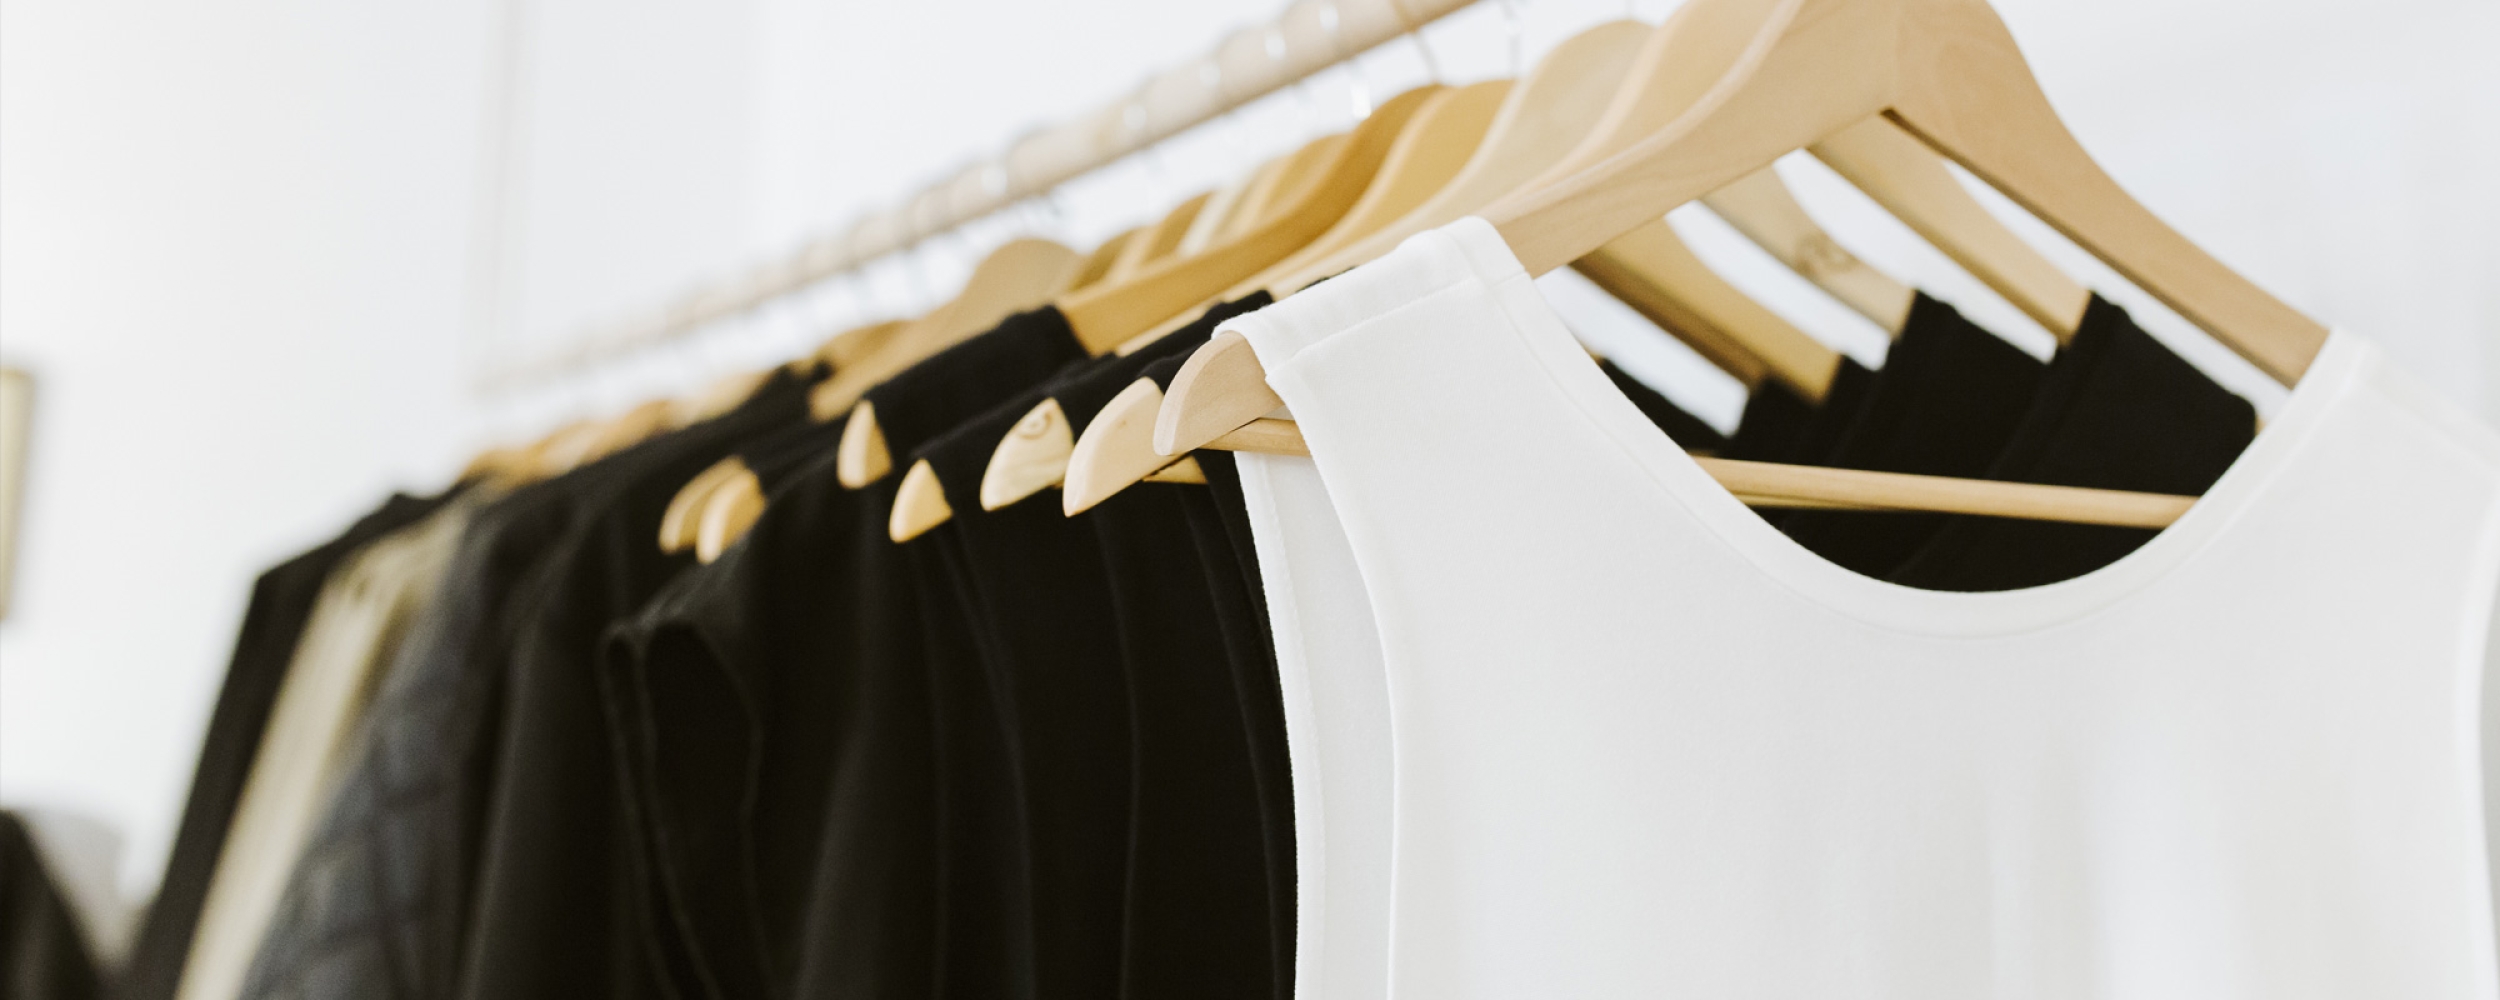 Close-up photo of a rack of clothing on the same timber hangers.